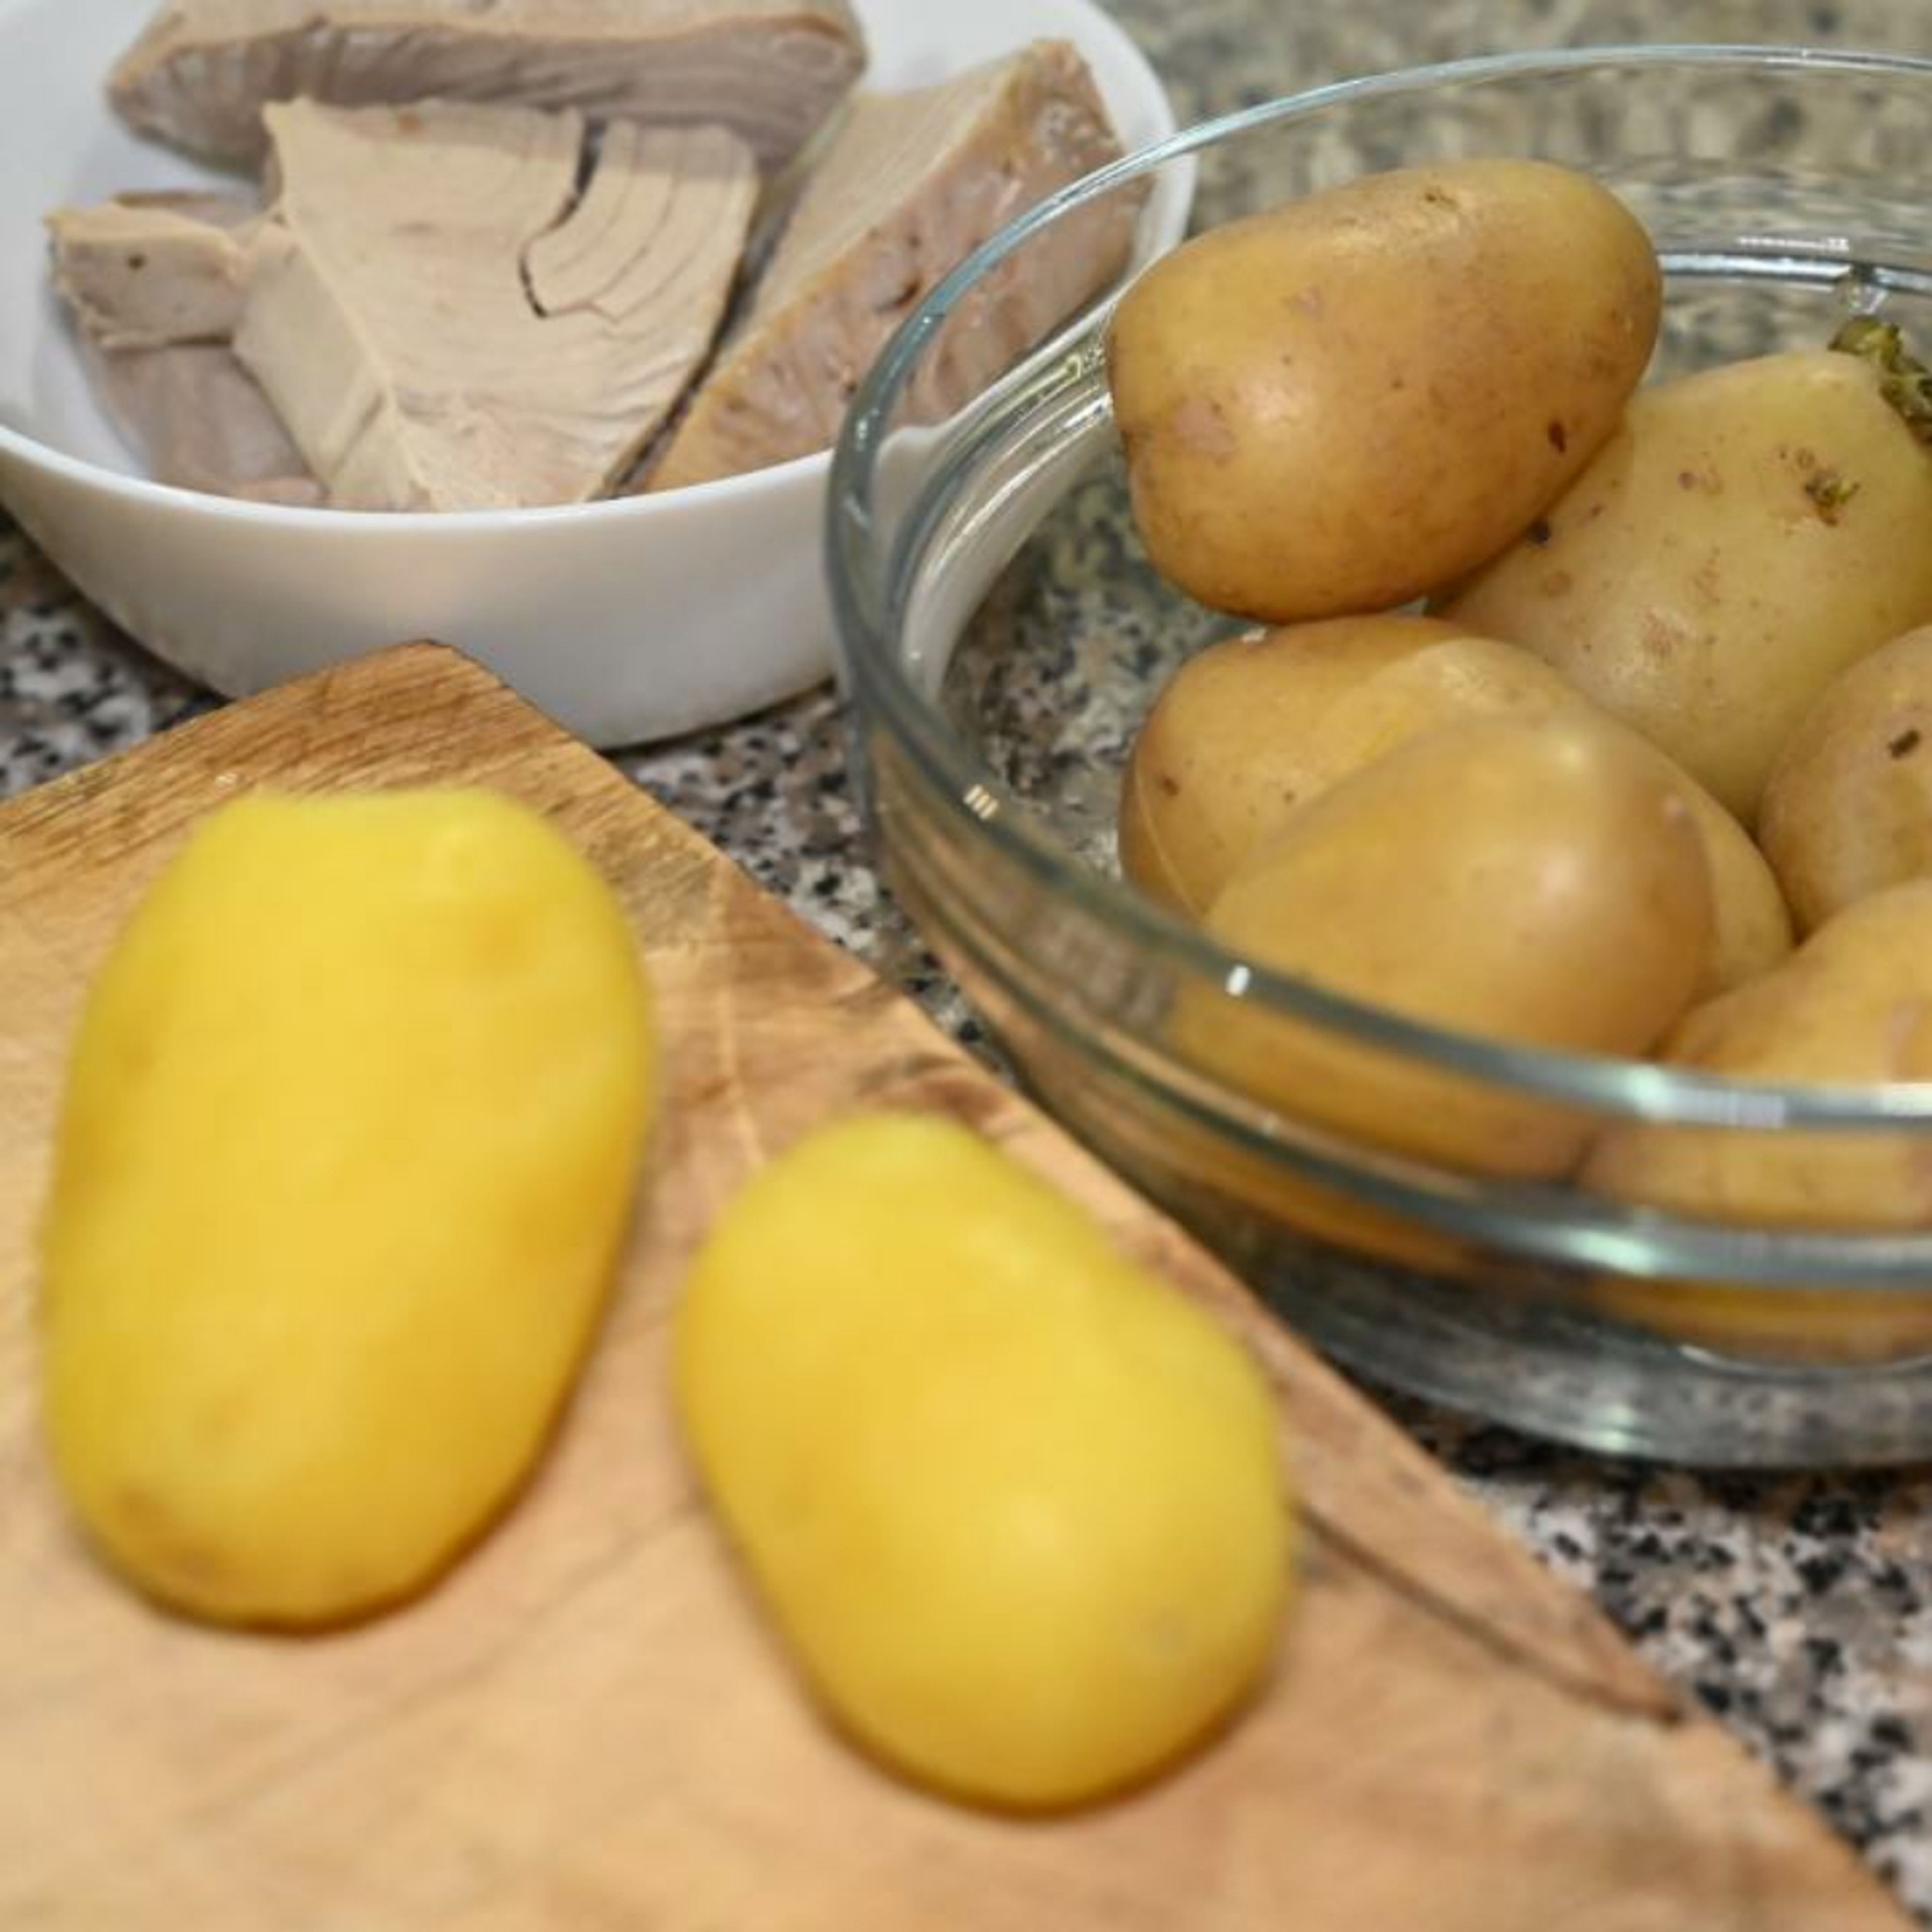 Drain the water. Unload the fish to a clean glass bowl. Peel the potatoes and Place them in a bowl.